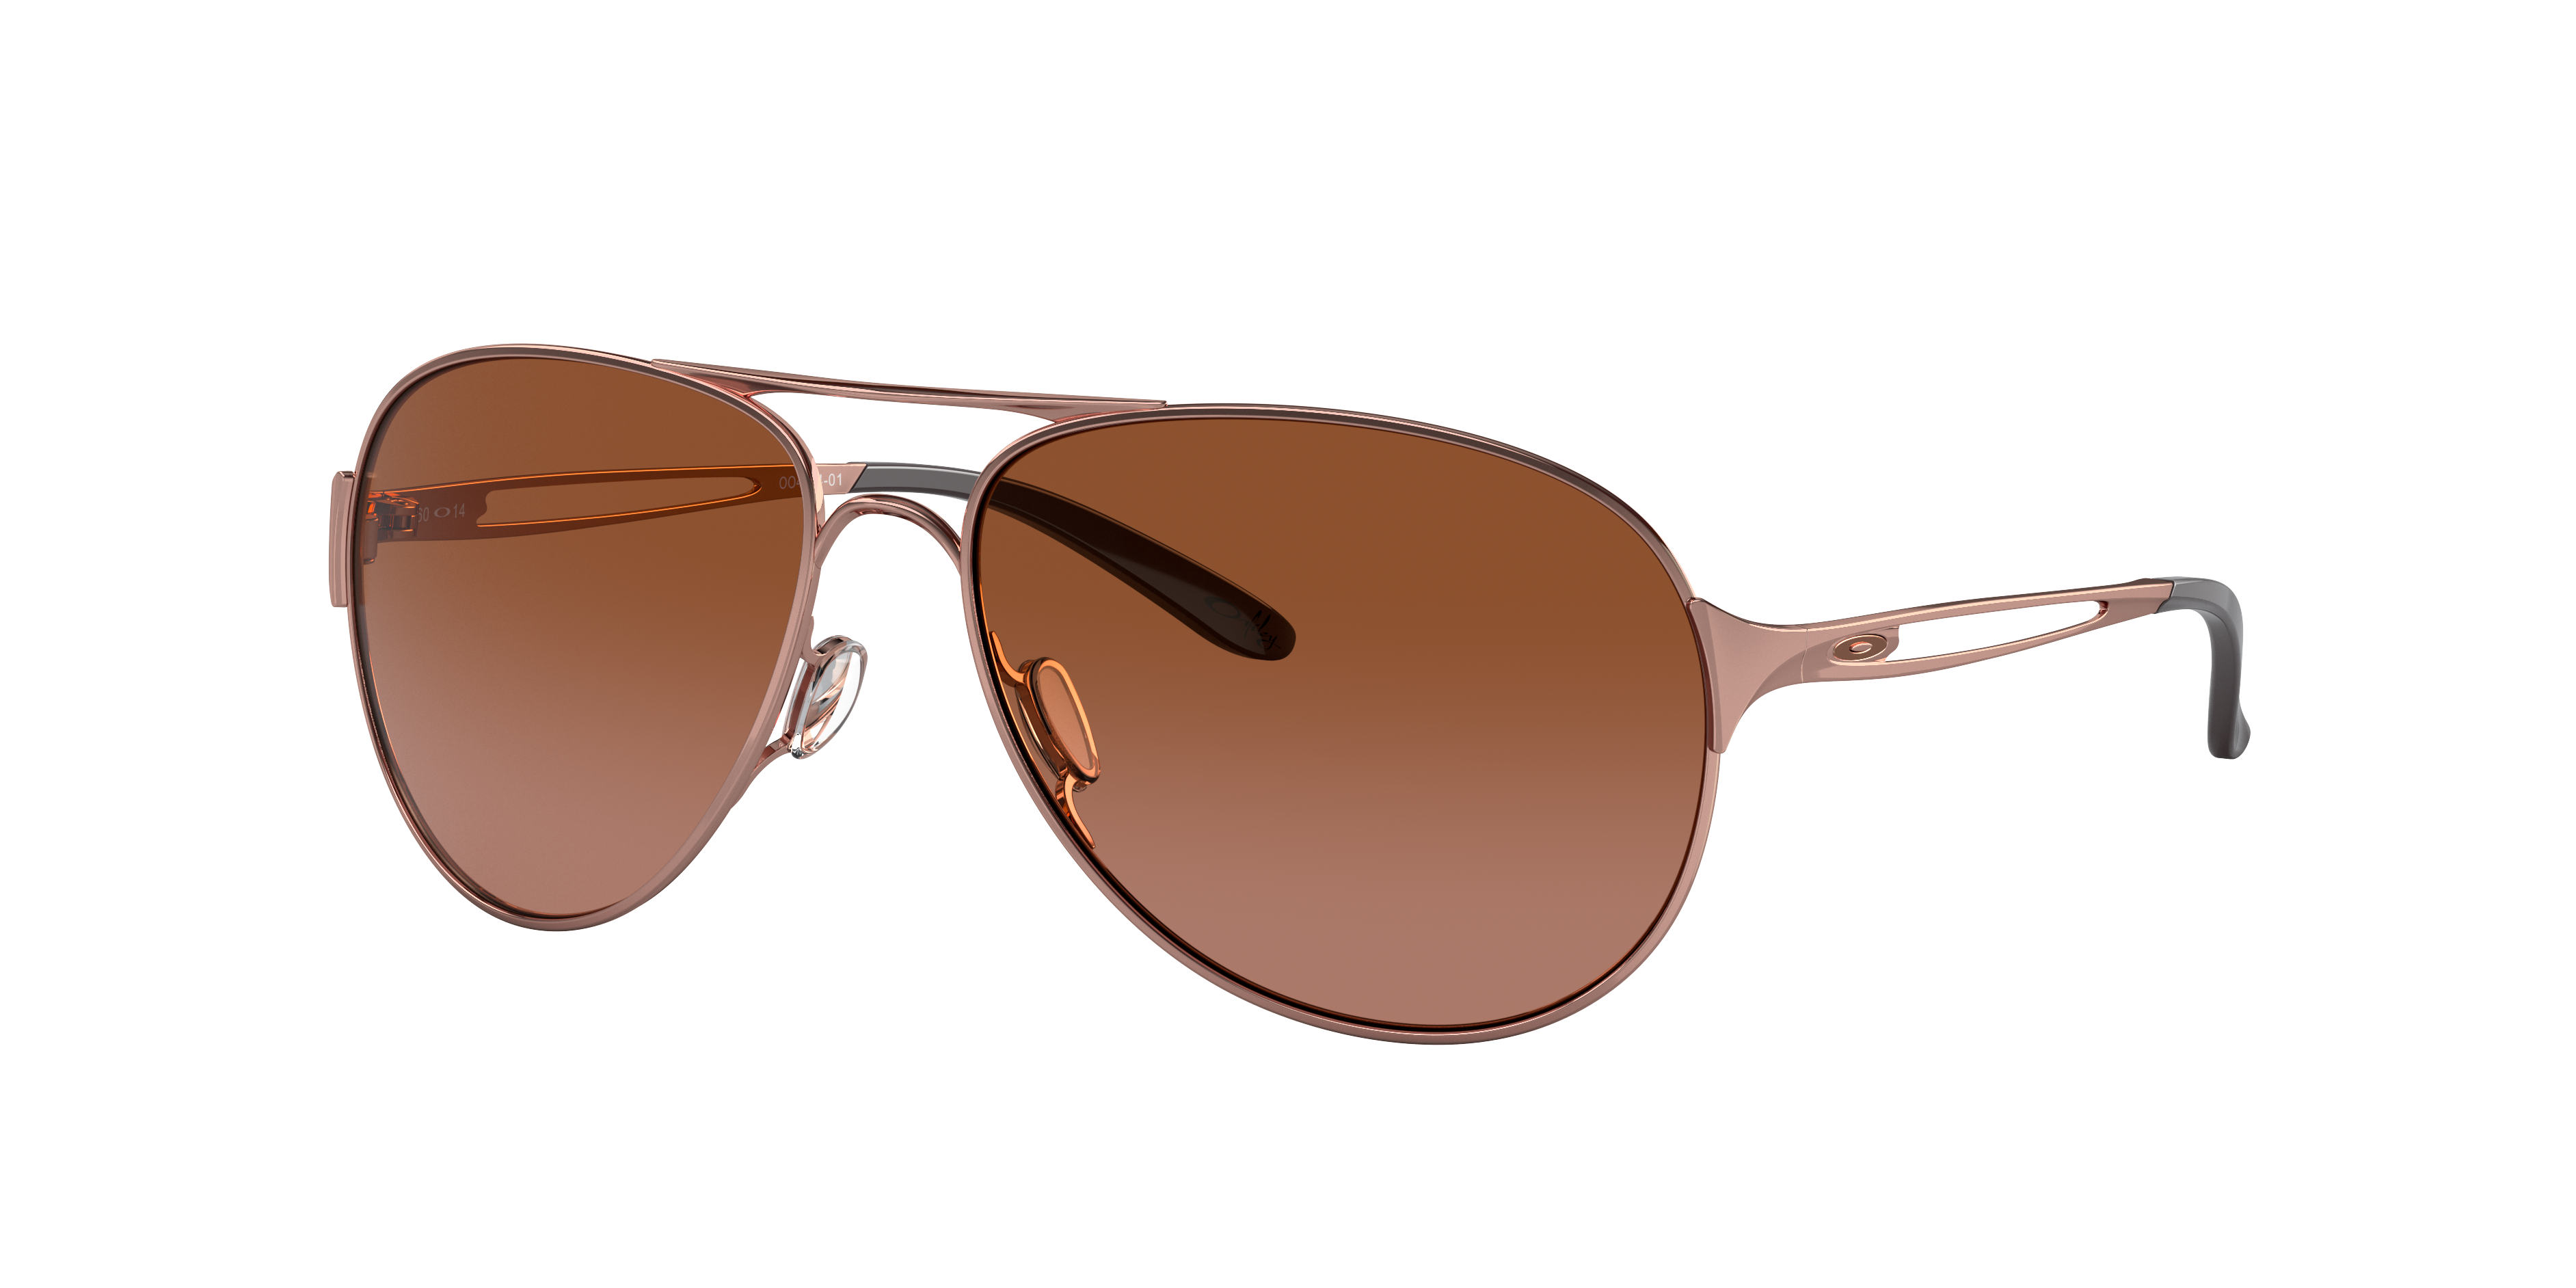 mens oakley sunglasses afterpay